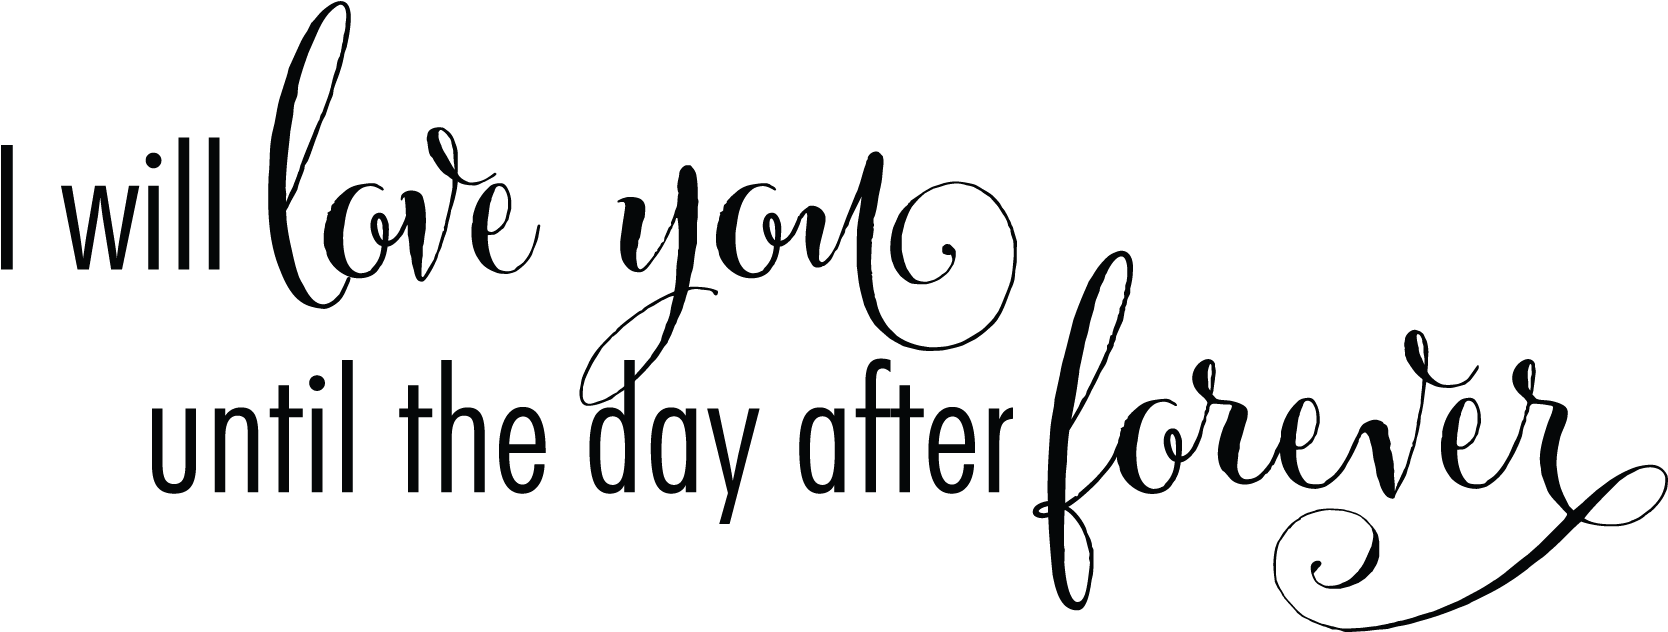 Download Will Love You Until The Day After Forever Png Image With No Background Pngkey Com